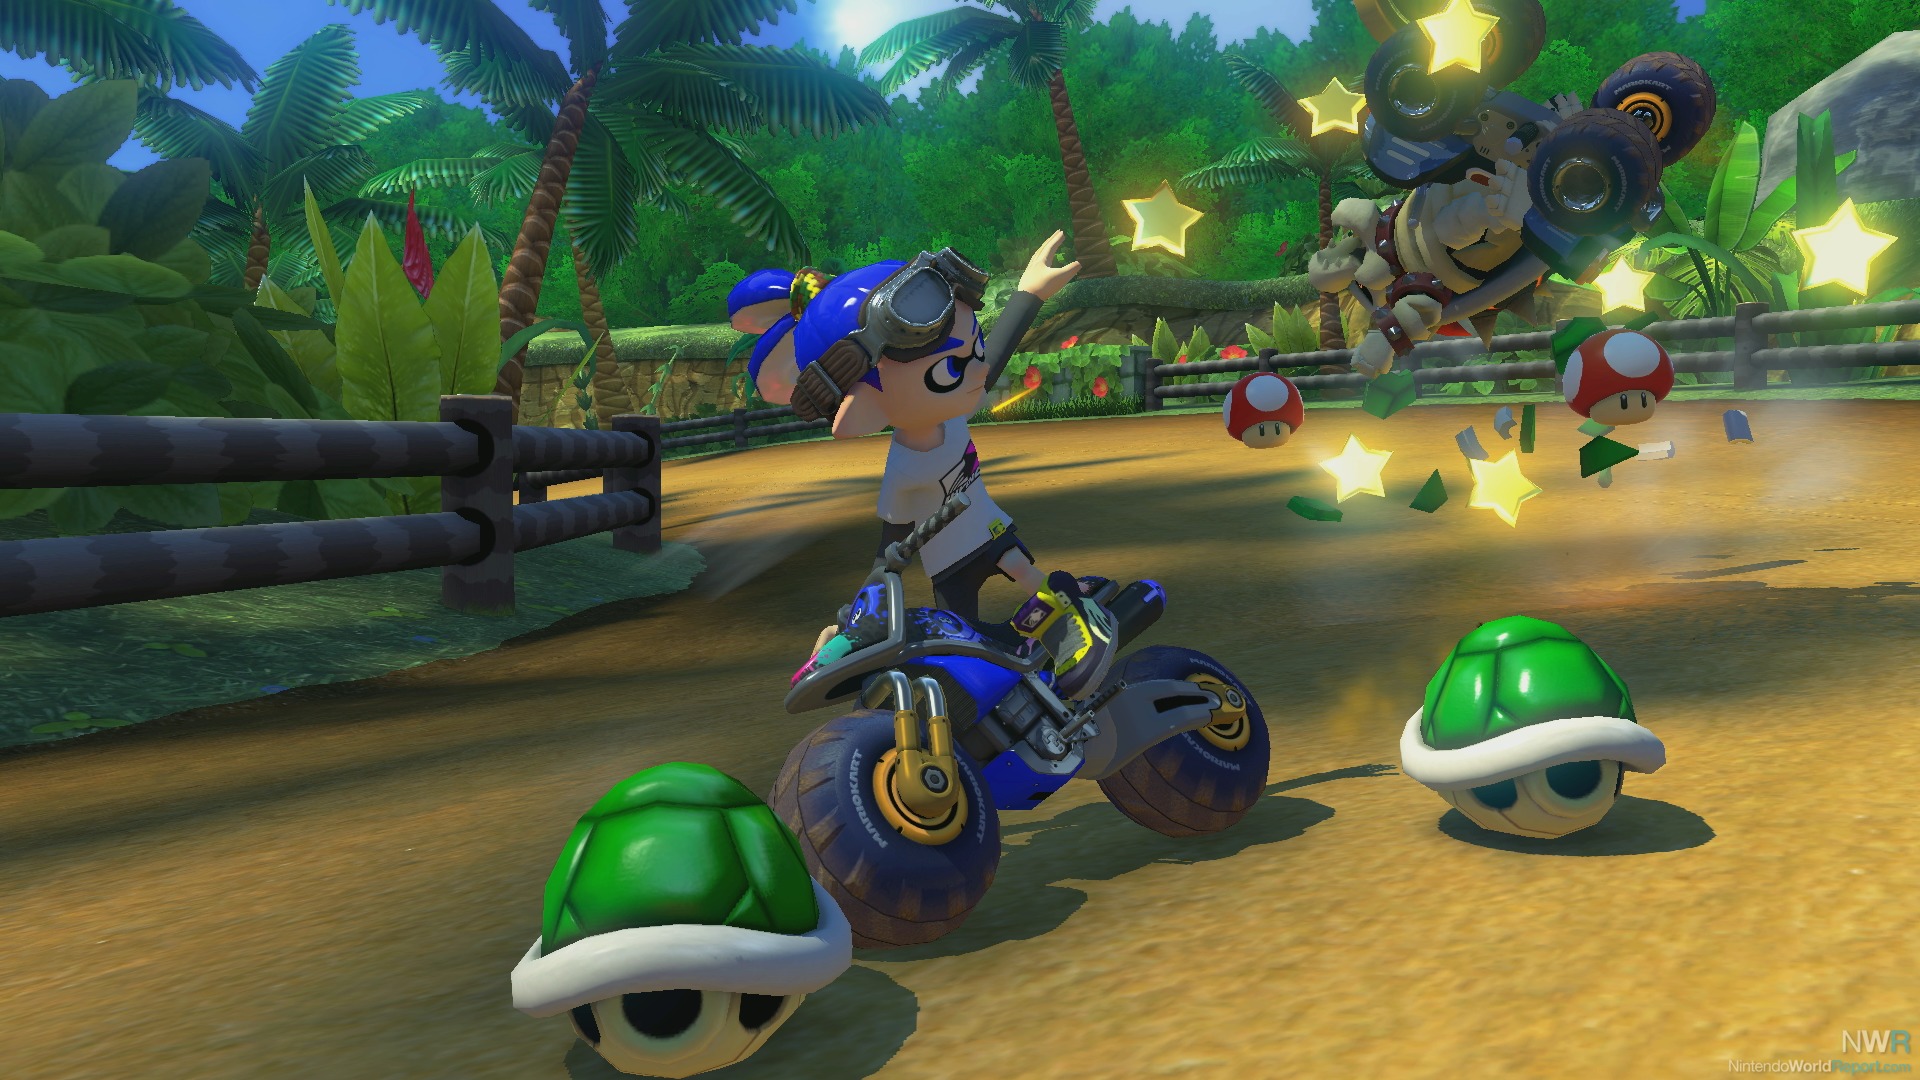 Mario Kart 8 Deluxe (for Nintendo Switch) Review